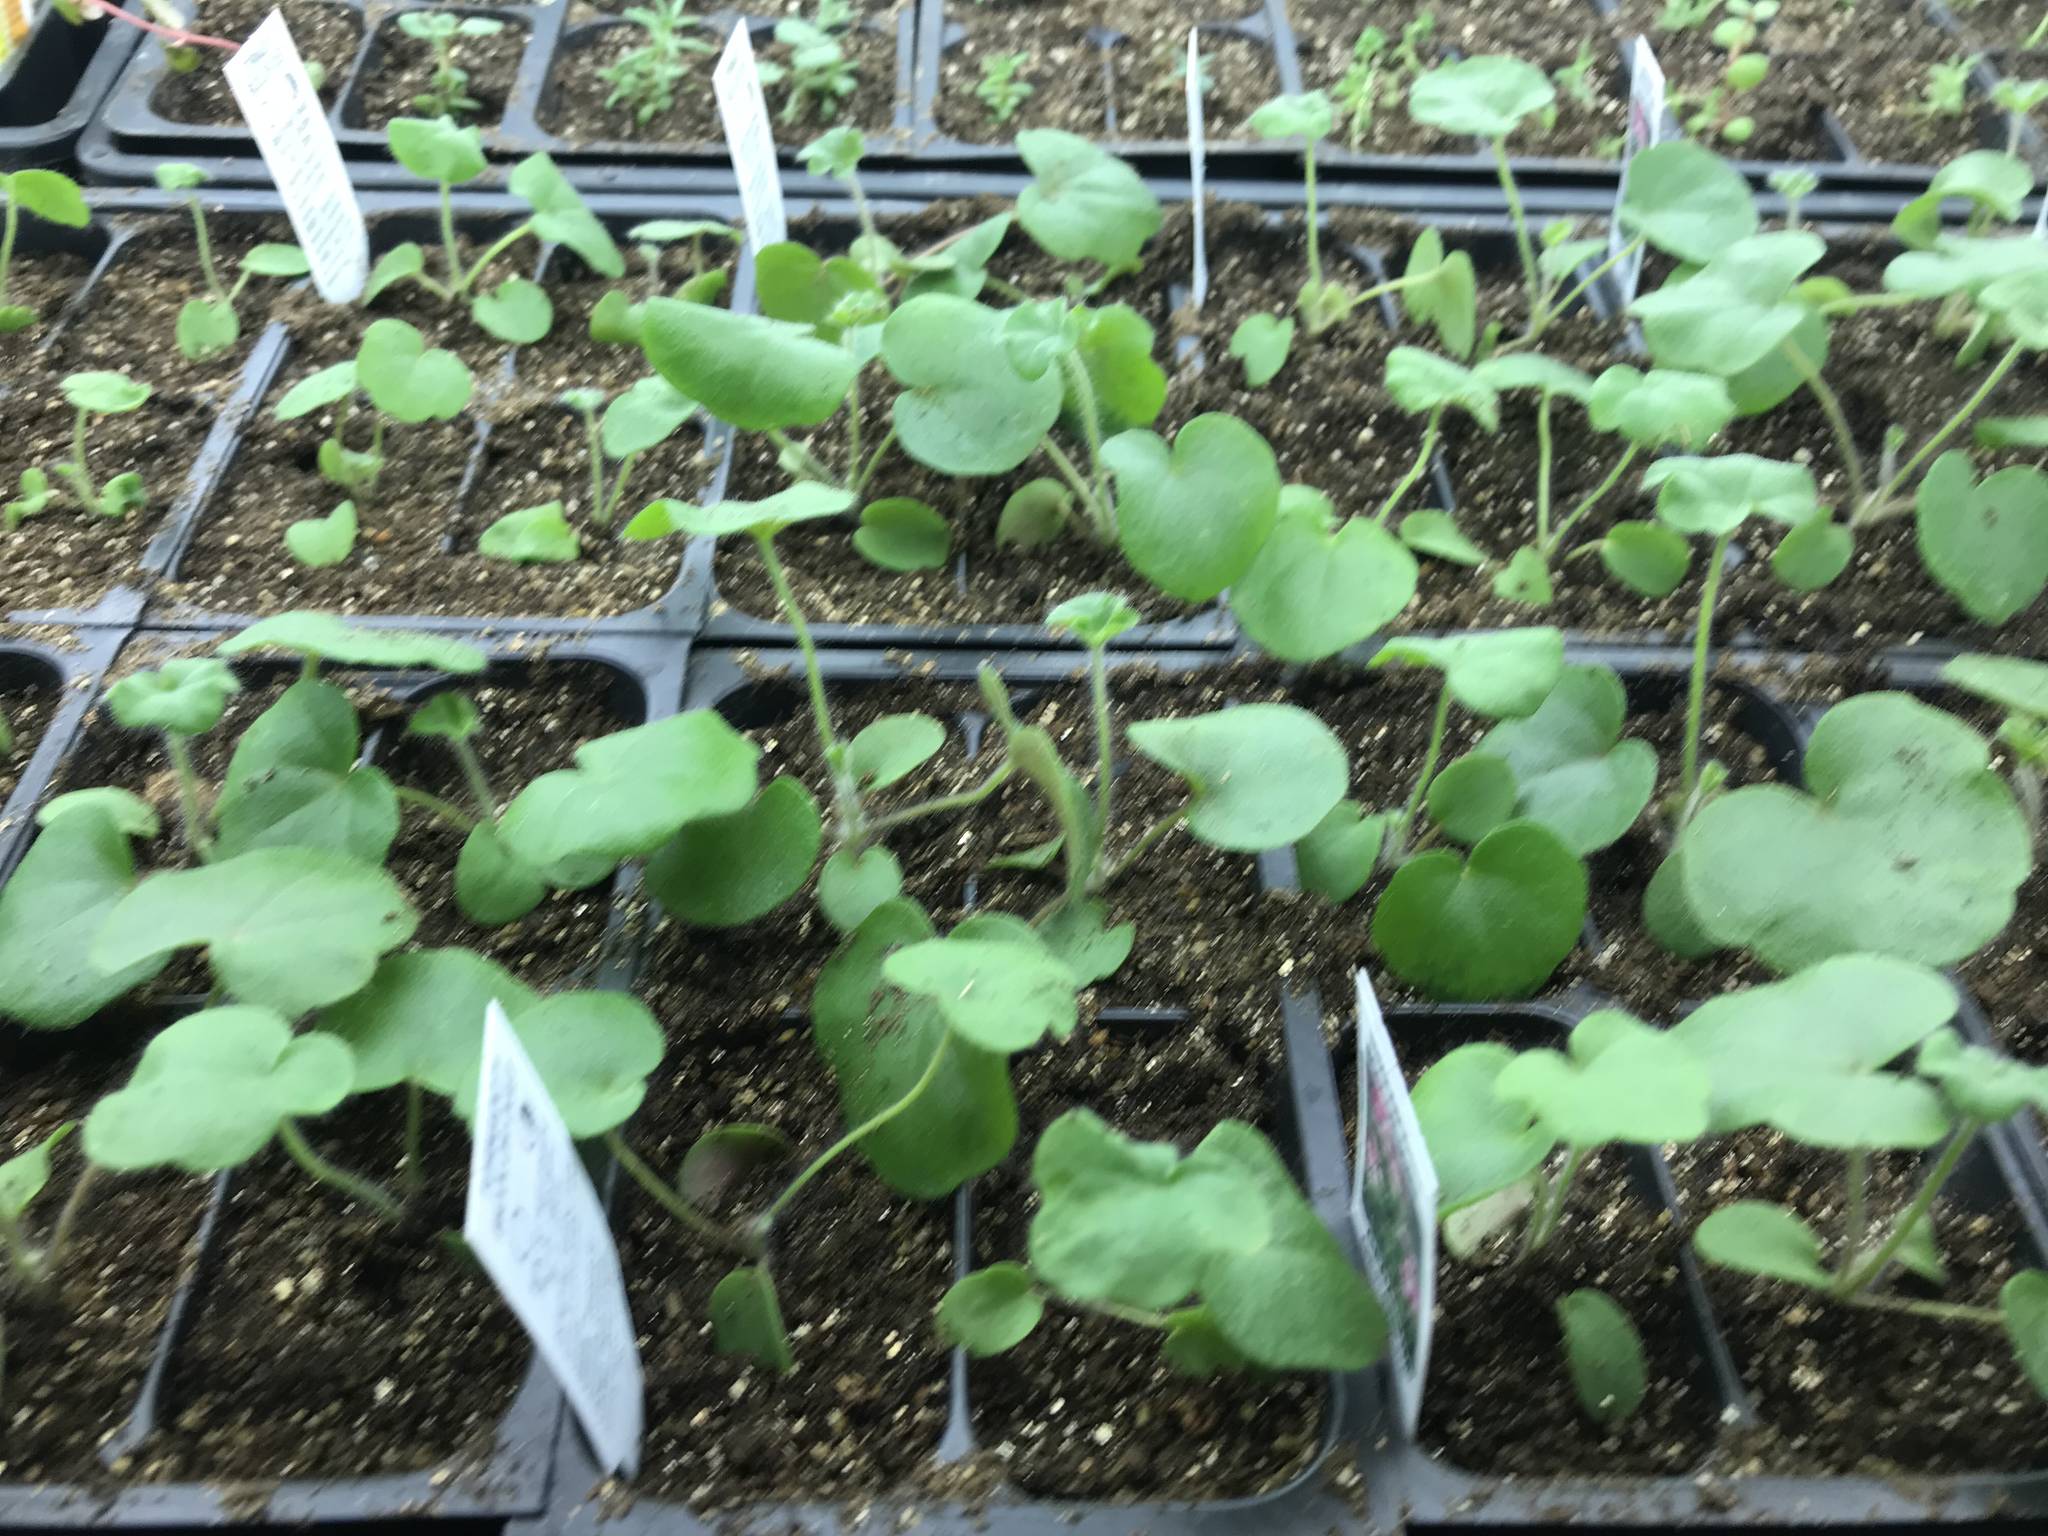 Some seedlings at Tracy Asselin’s Baycrest Greenhouse (Photo by Rosemary Fitzpatrick)